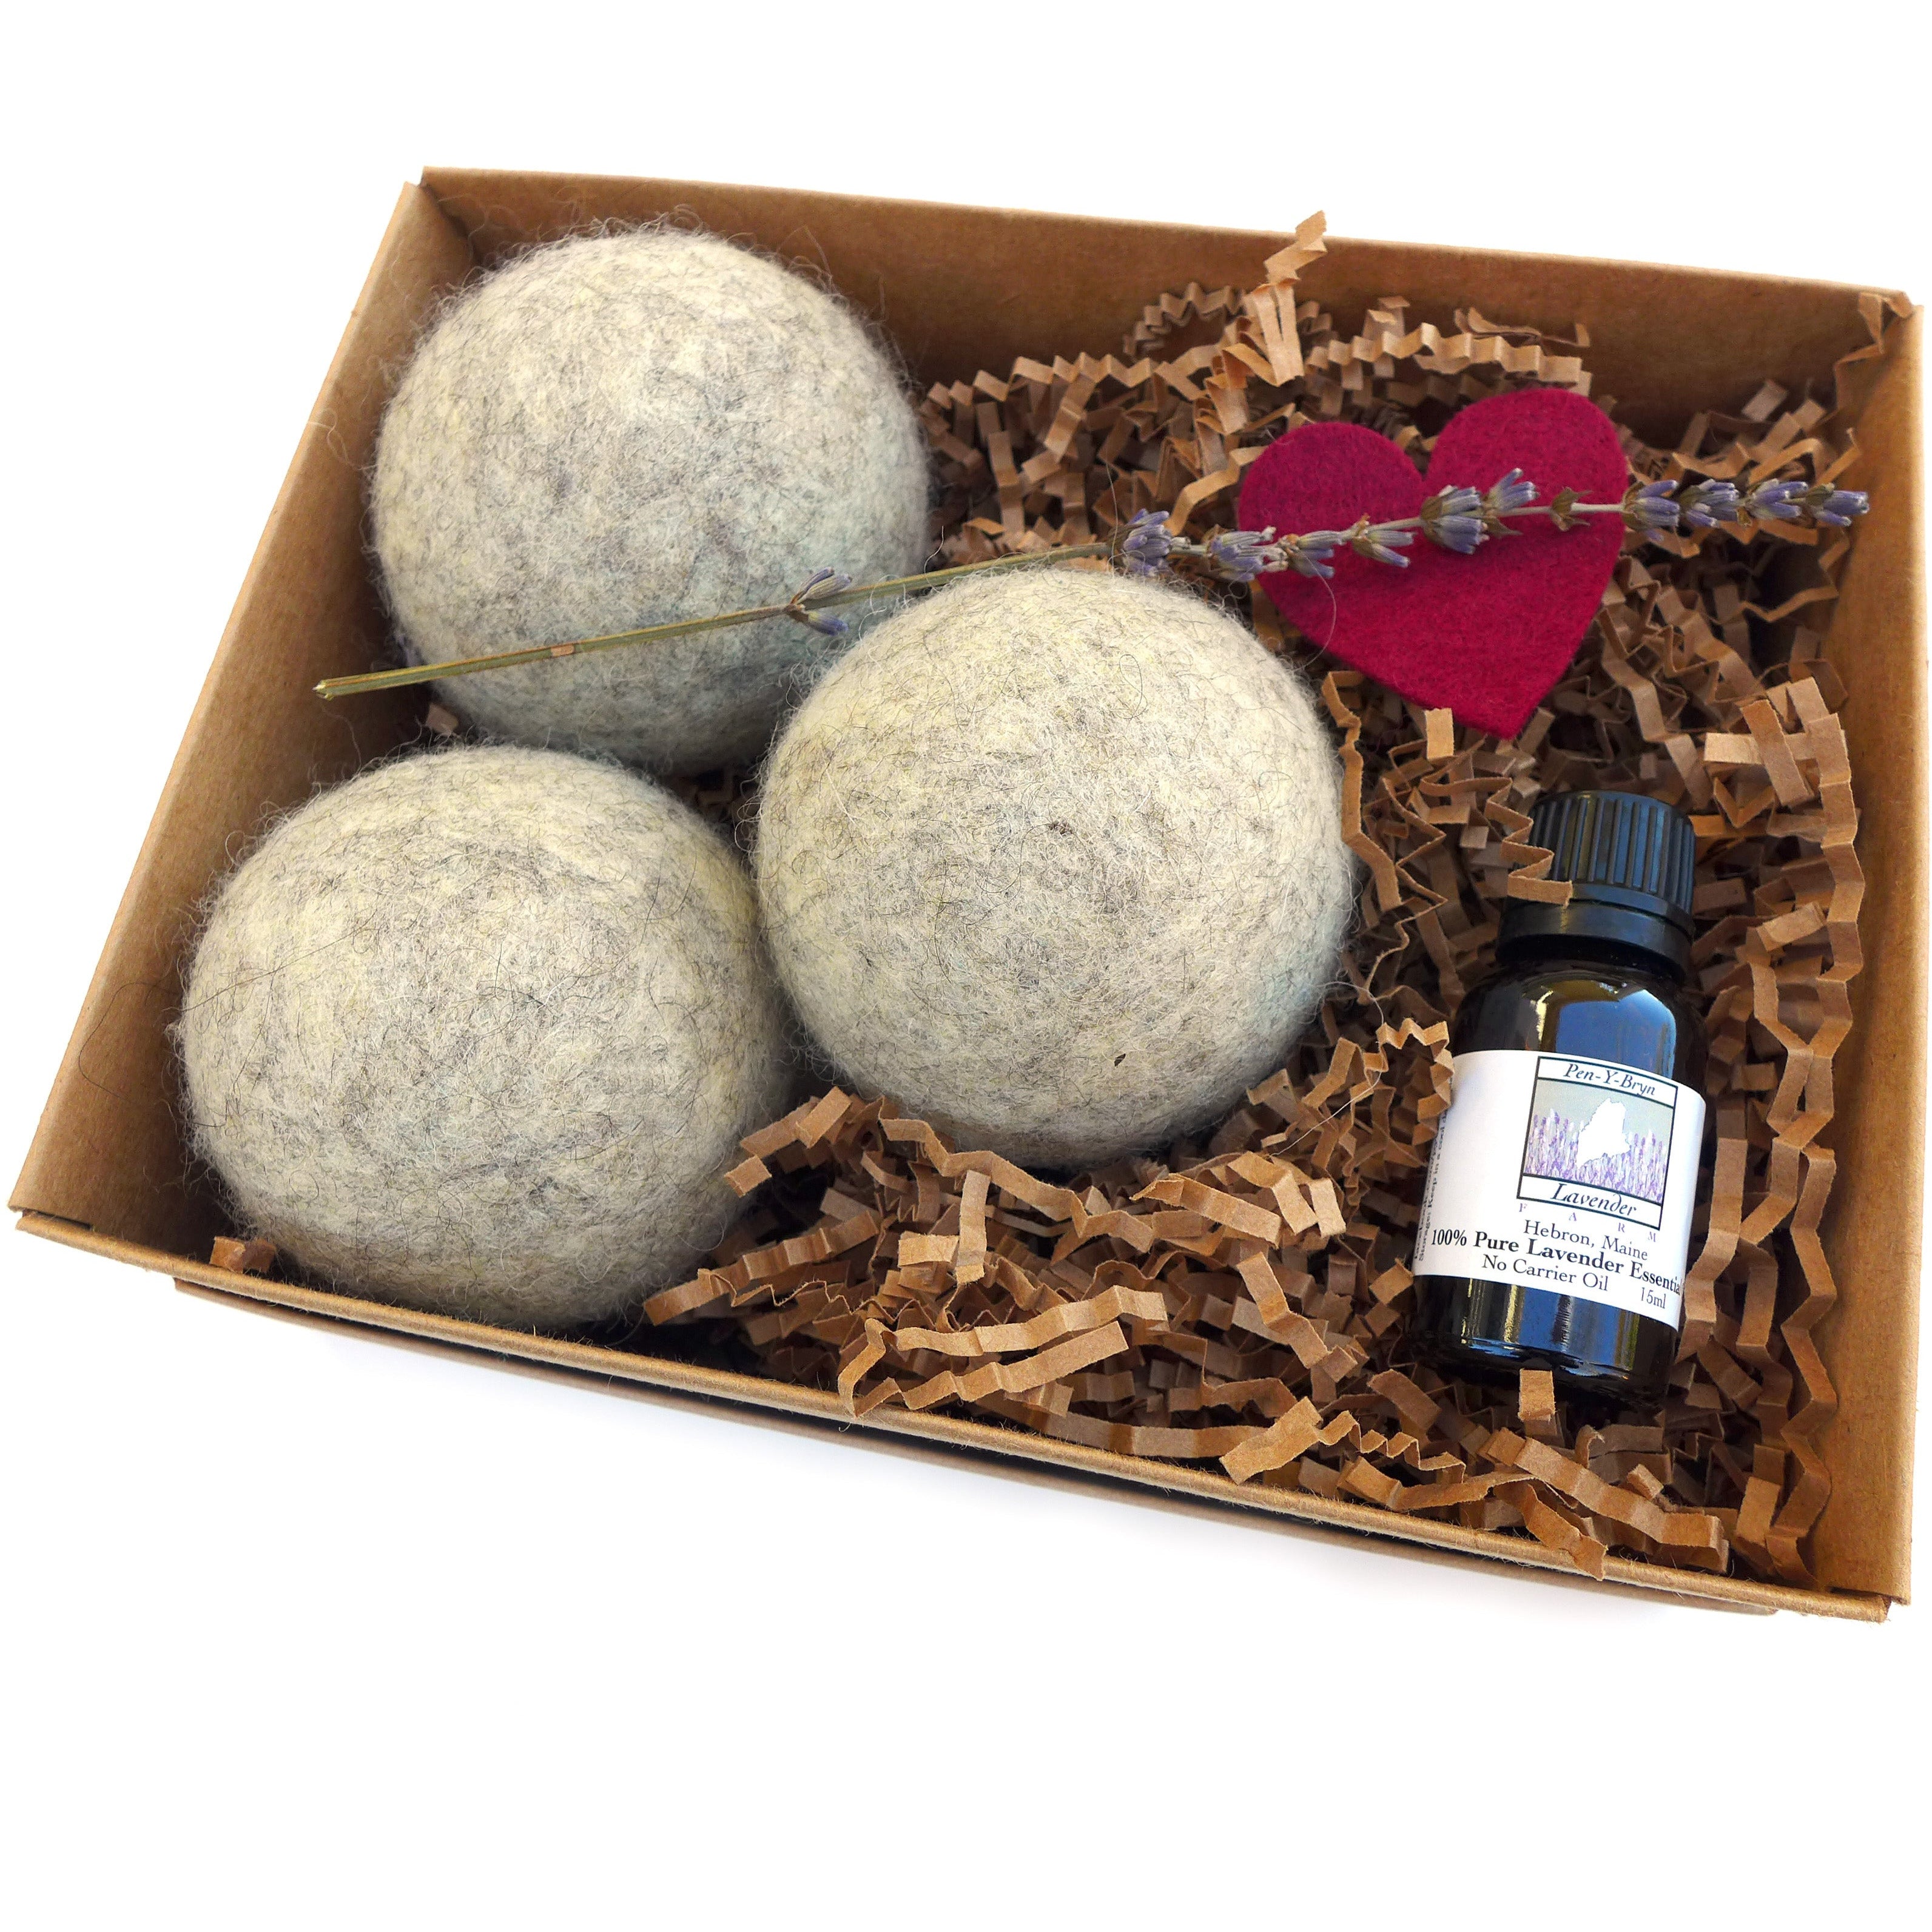 5 Best Essential Oils For Wool Dryer Balls  Essential oils for laundry,  Natural cleaning products, Essential oils gifts